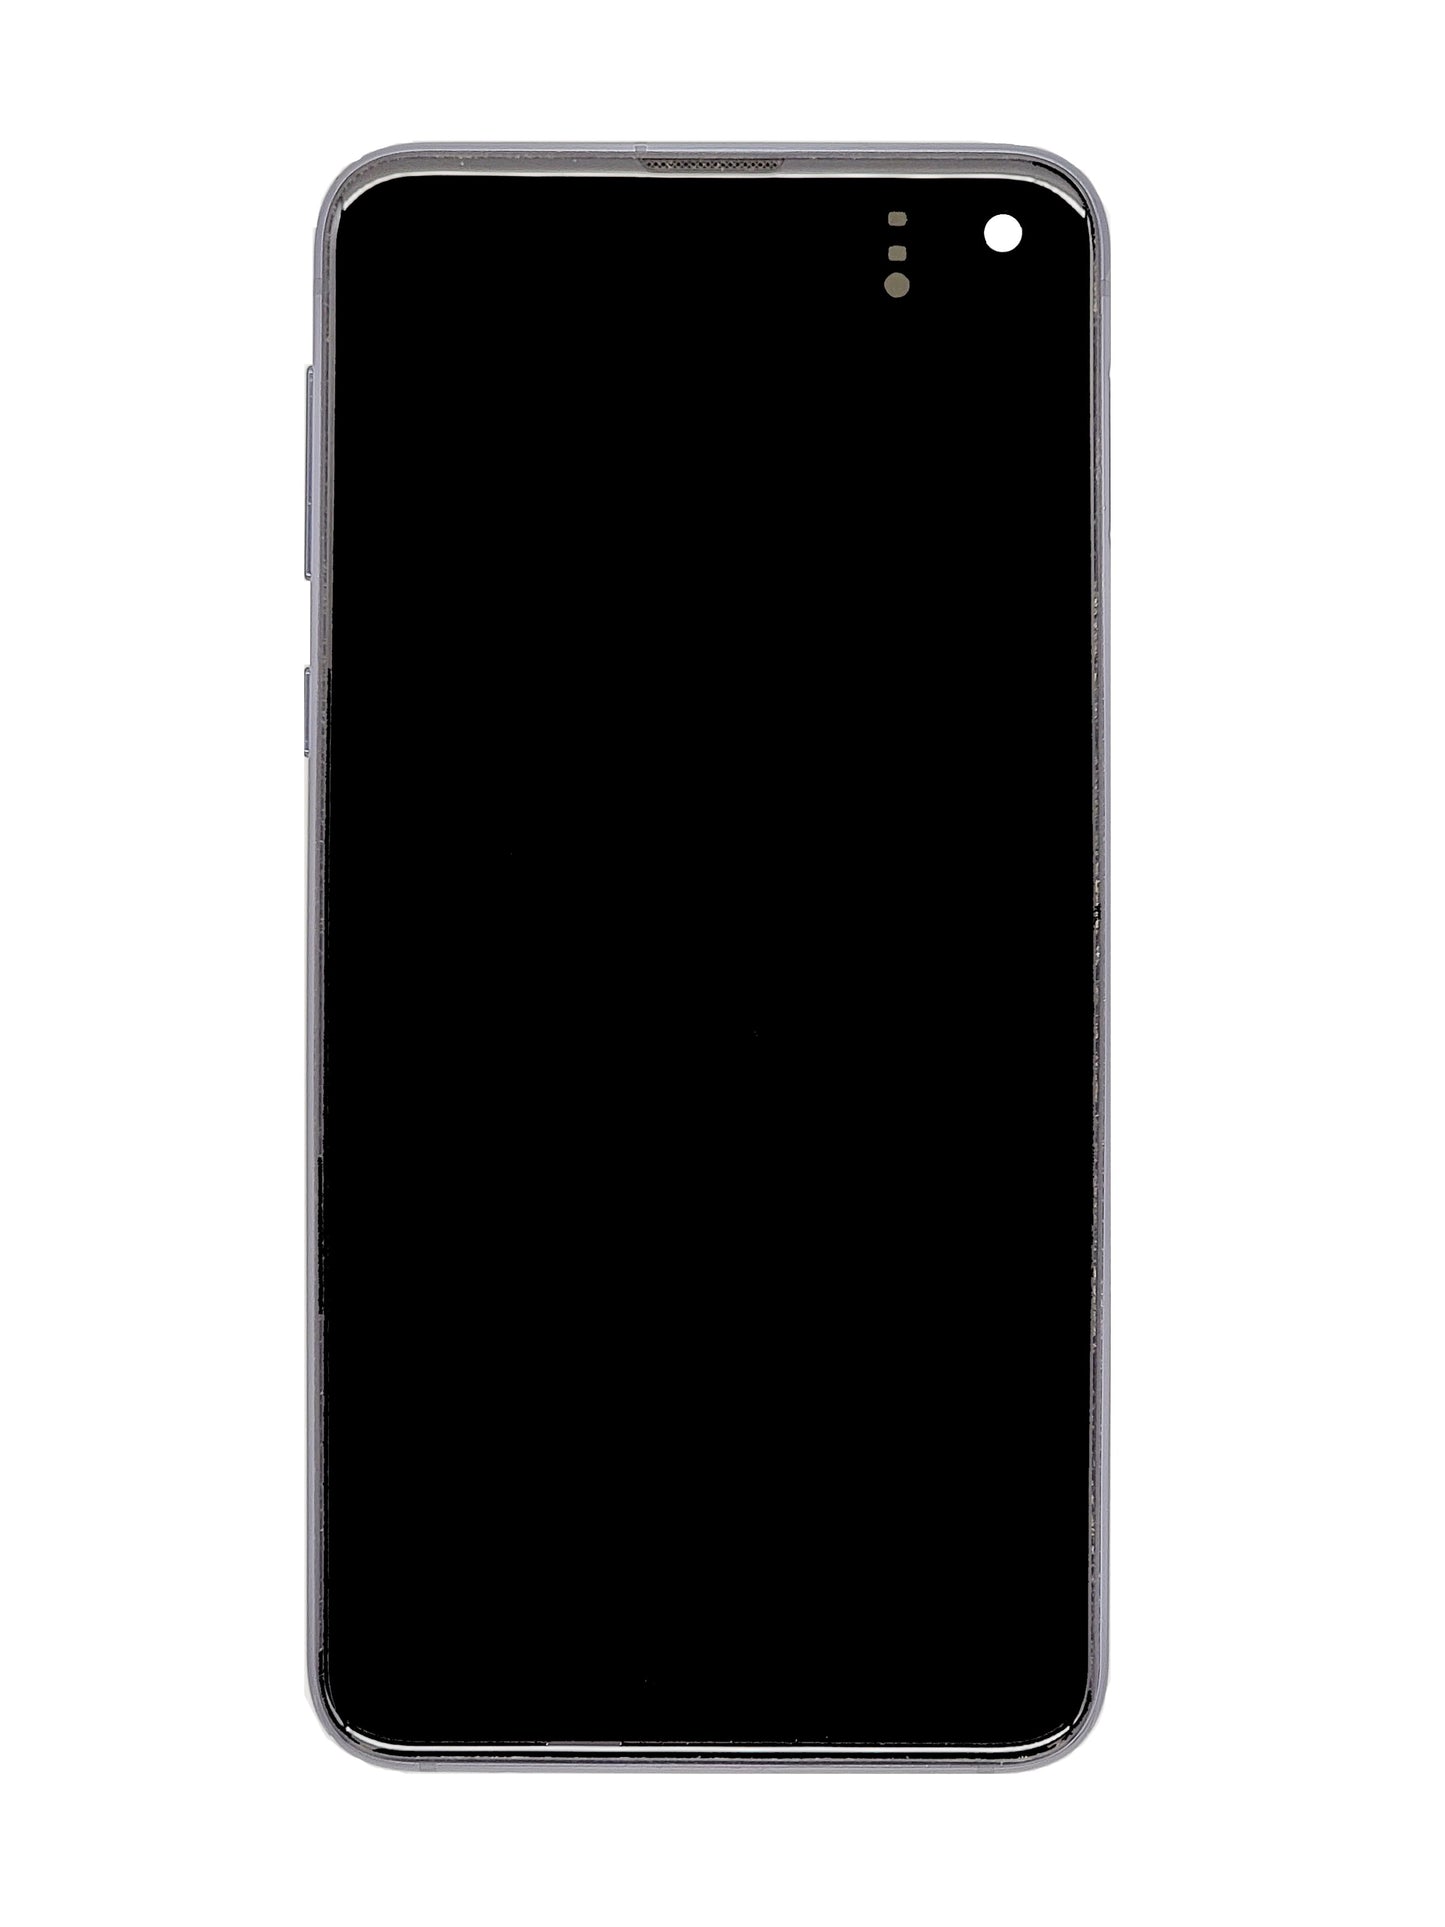 SGS S10e Screen Assembly (With The Frame) (Refurbished) (Prism Black)